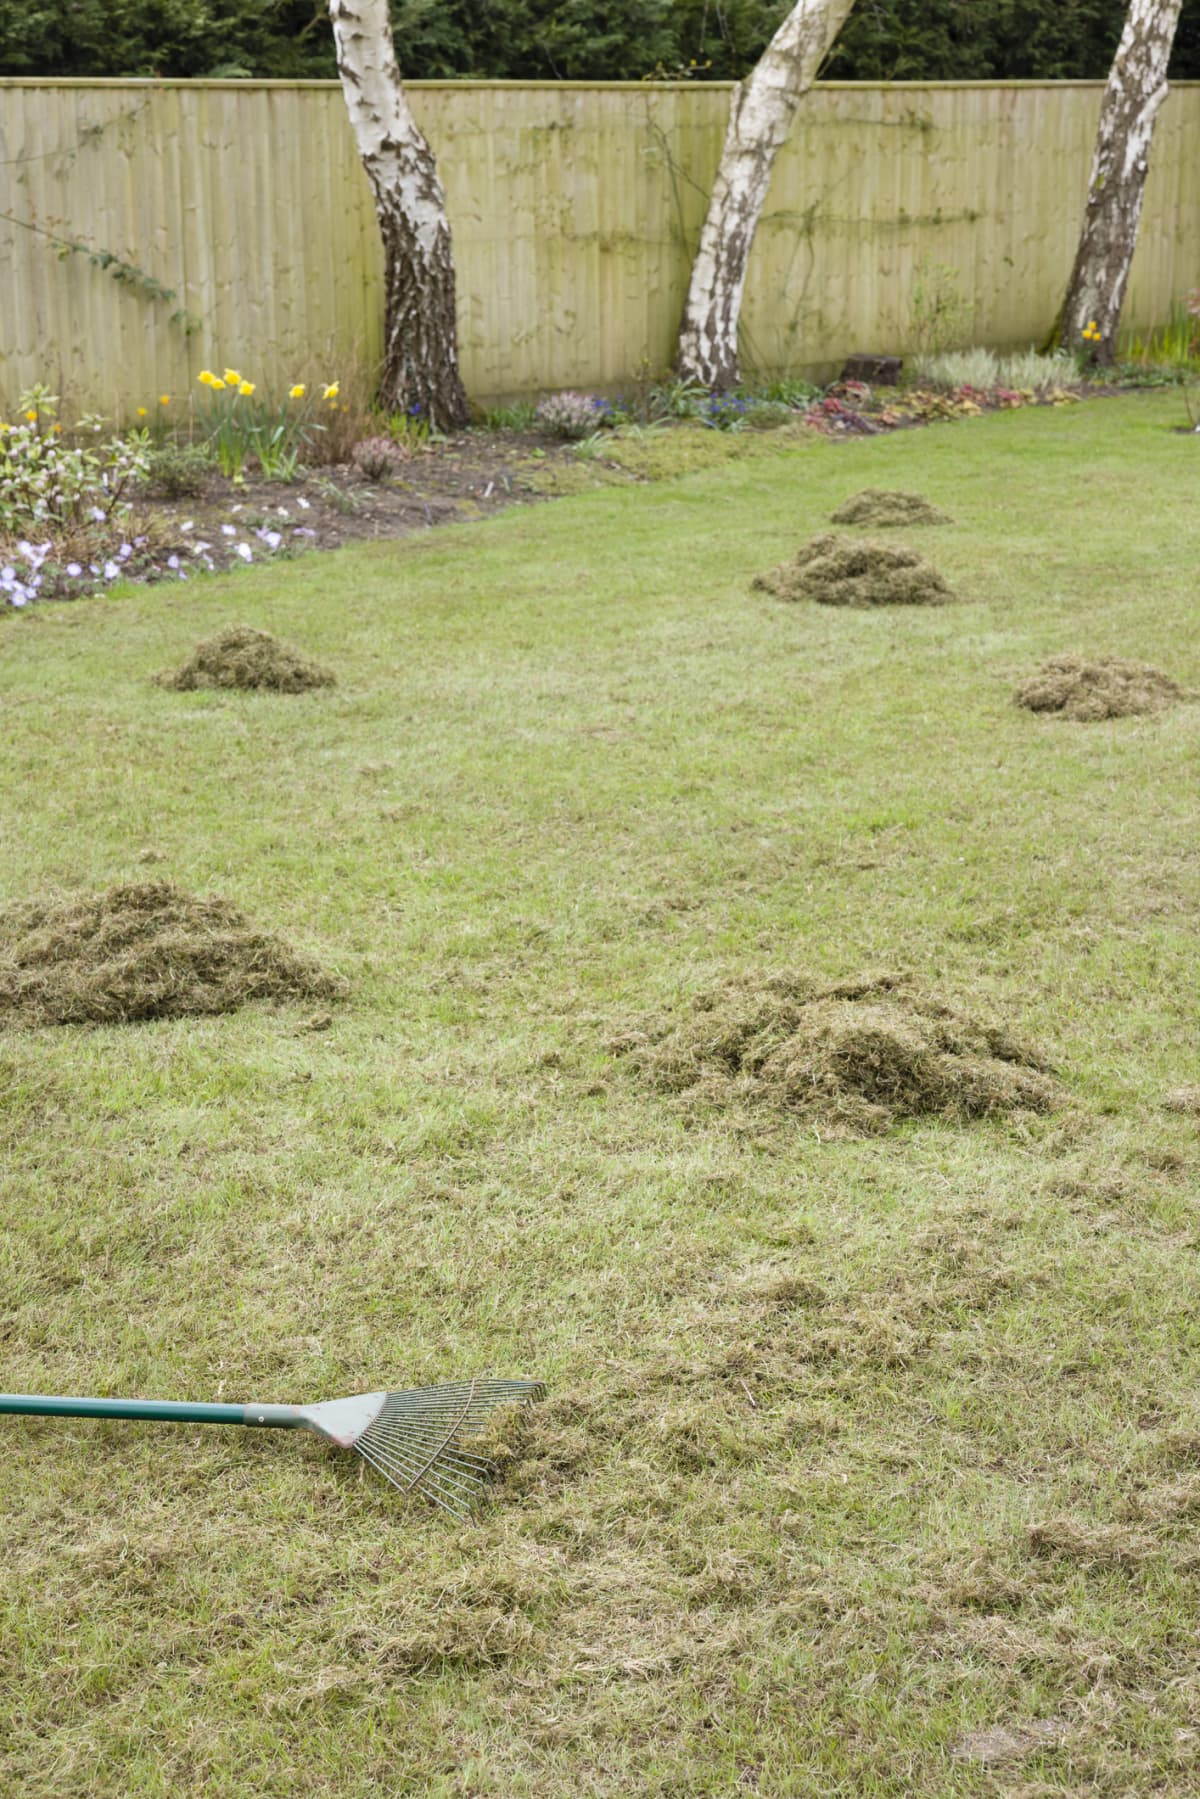 A rake and removed thatch on a lawn